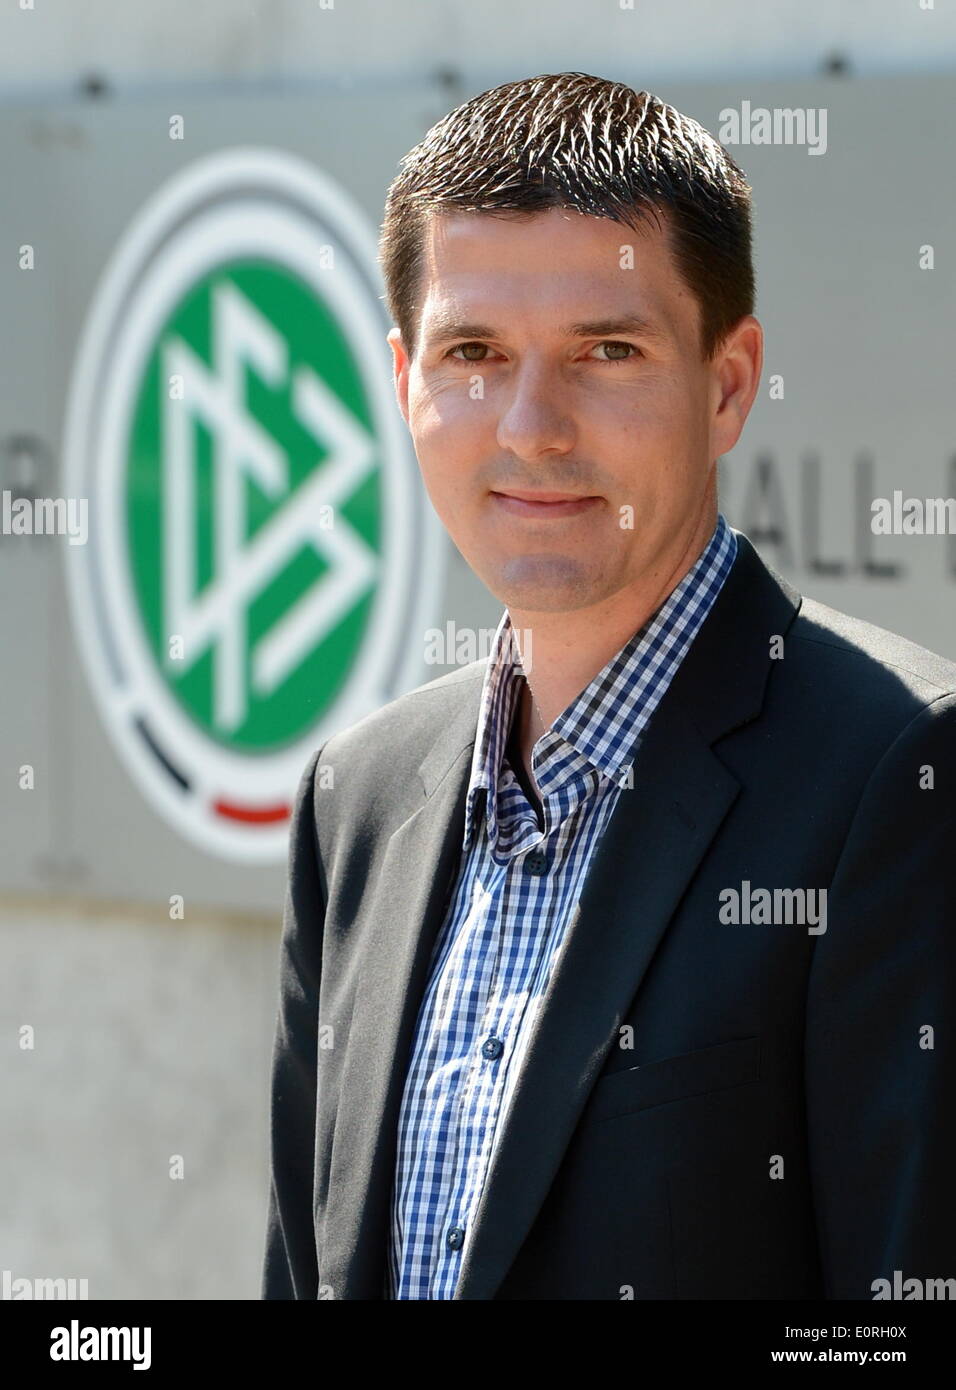 Frankfurt Main, Germany. 19th May, 2014. The linesman from the German Football Association (DFB), Stefan Lupp stand during a press conference outside of DFB headquarters in Frankfurt Main, Germany, 19 May 2014. Photo: ROLAND HOLSCHNEIDER/dpa/Alamy Live News Stock Photo